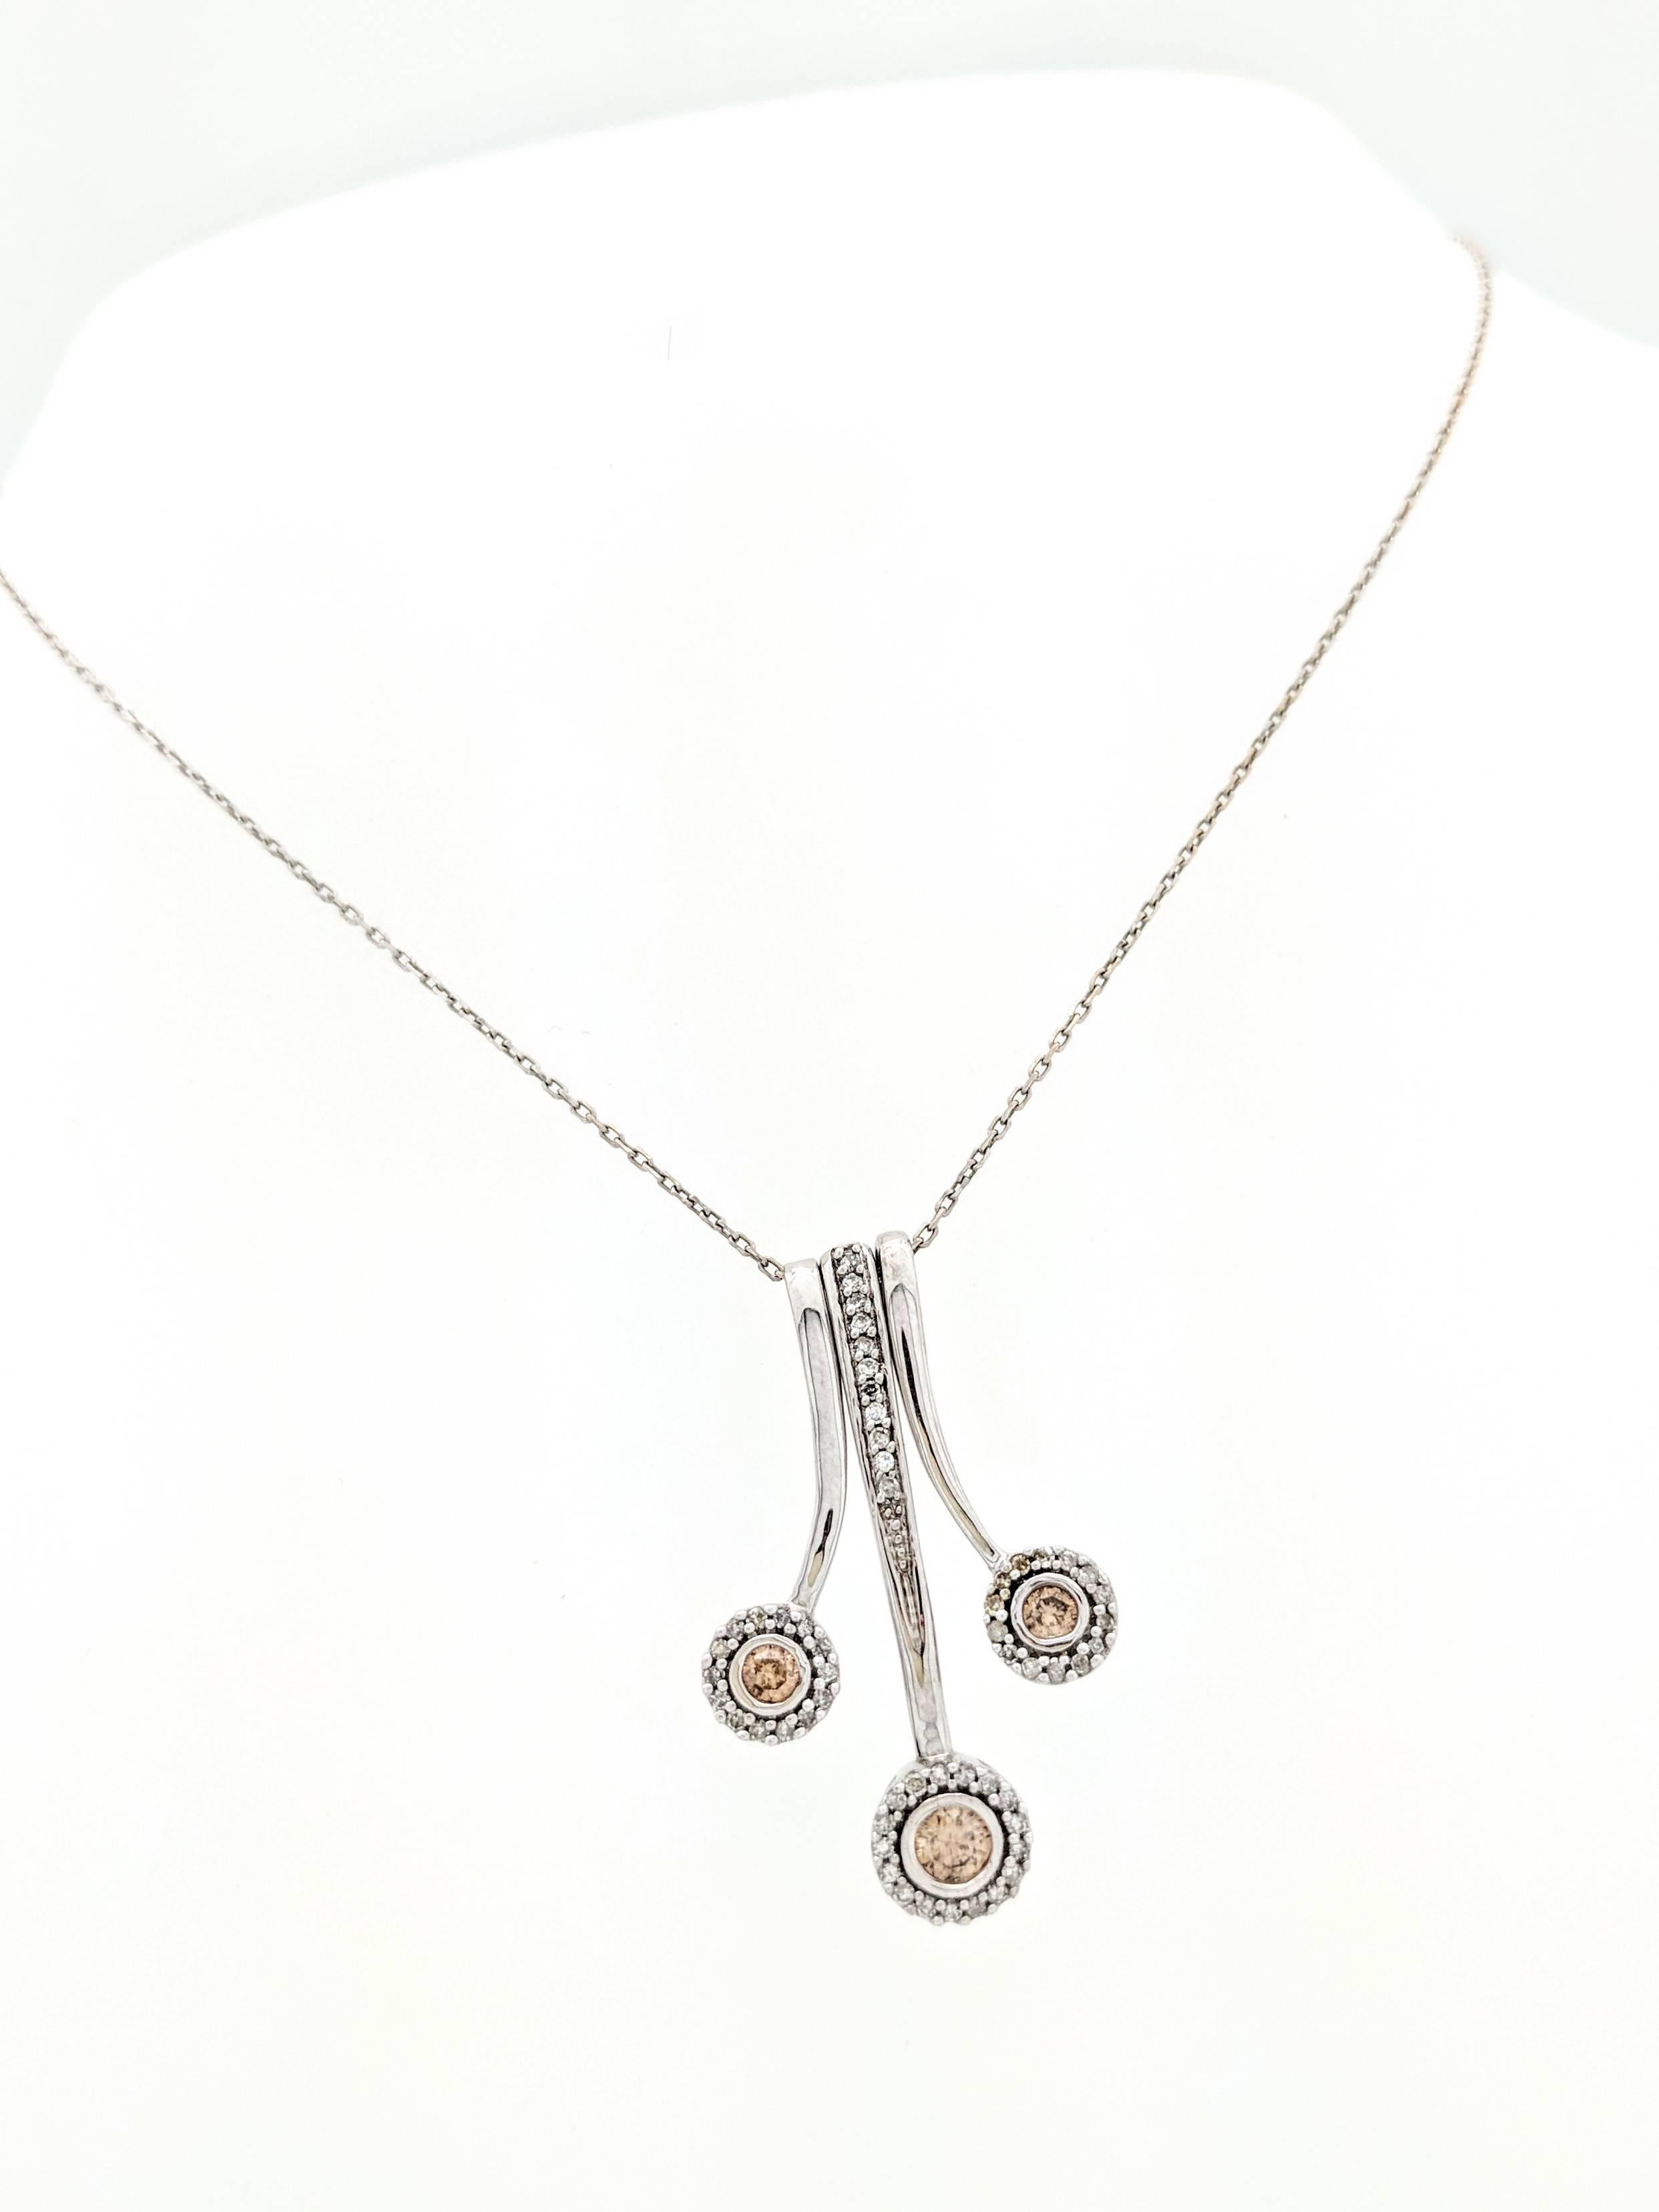 14K White Gold 3-Piece Champagne & White Diamond Halo Pendant Necklace 

You are viewing a beautiful Champagne & White Diamond Halo Pendant/Necklace. This pendant features 3 individual pieces that slide together to make the look of one. Each piece